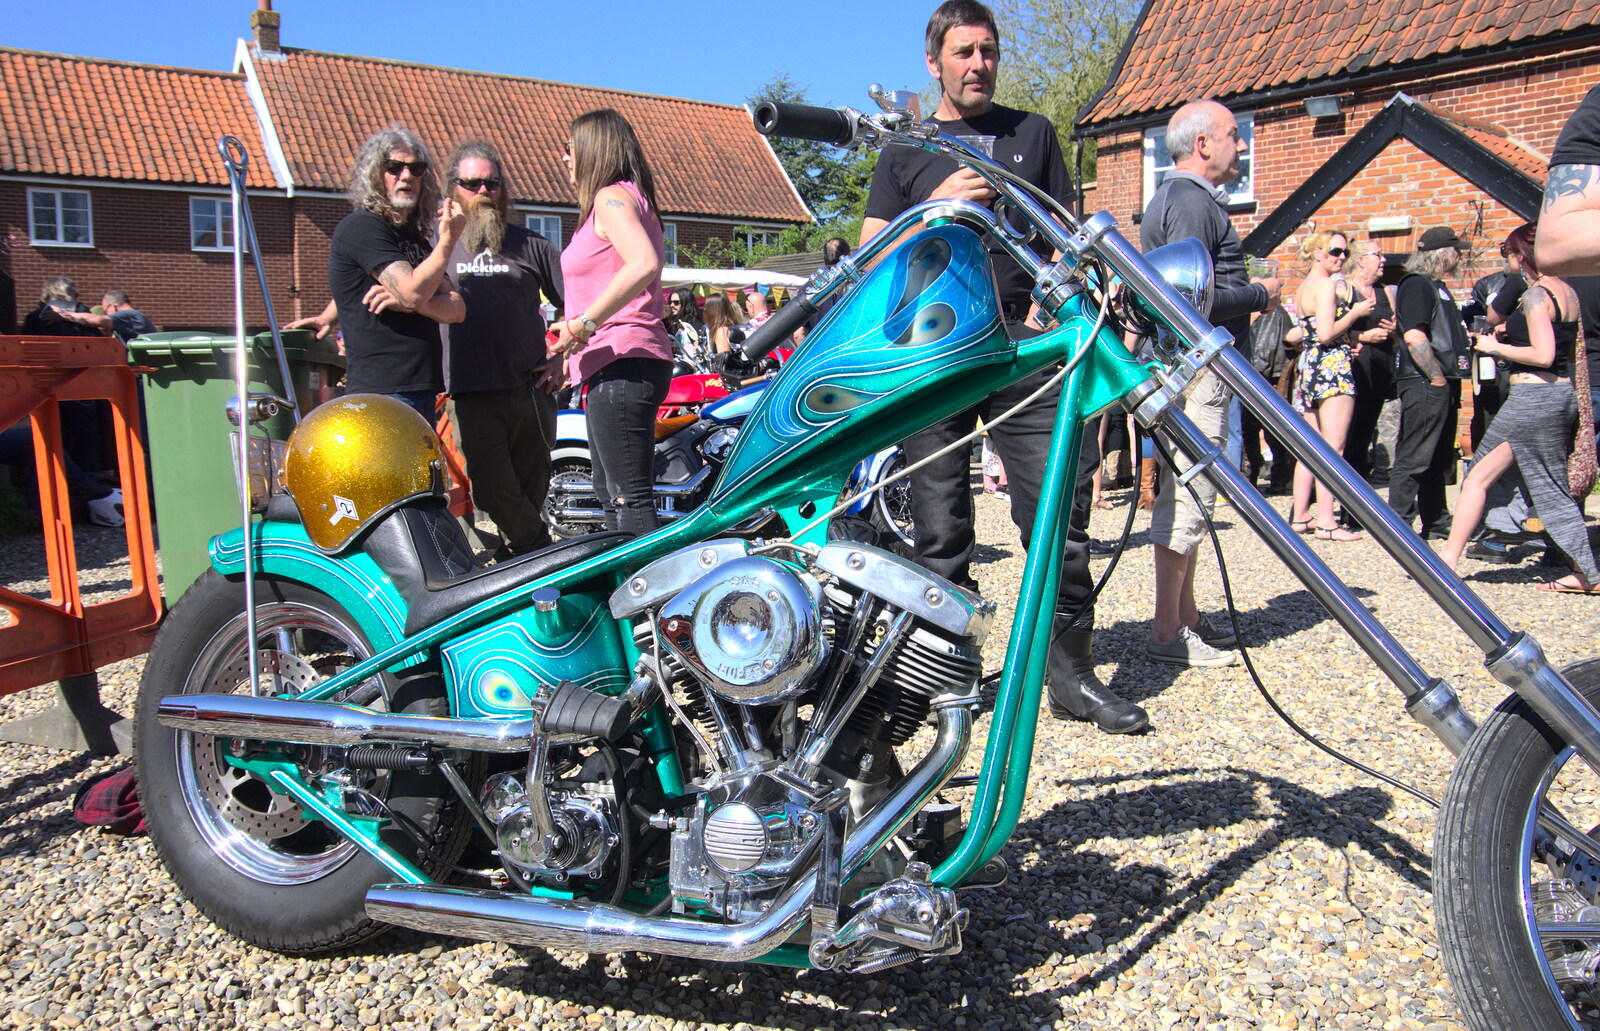 An electric-green chopper from Beer, Bikes and Bands, Burston Crown, Burston, Norfolk - 6th May 2018